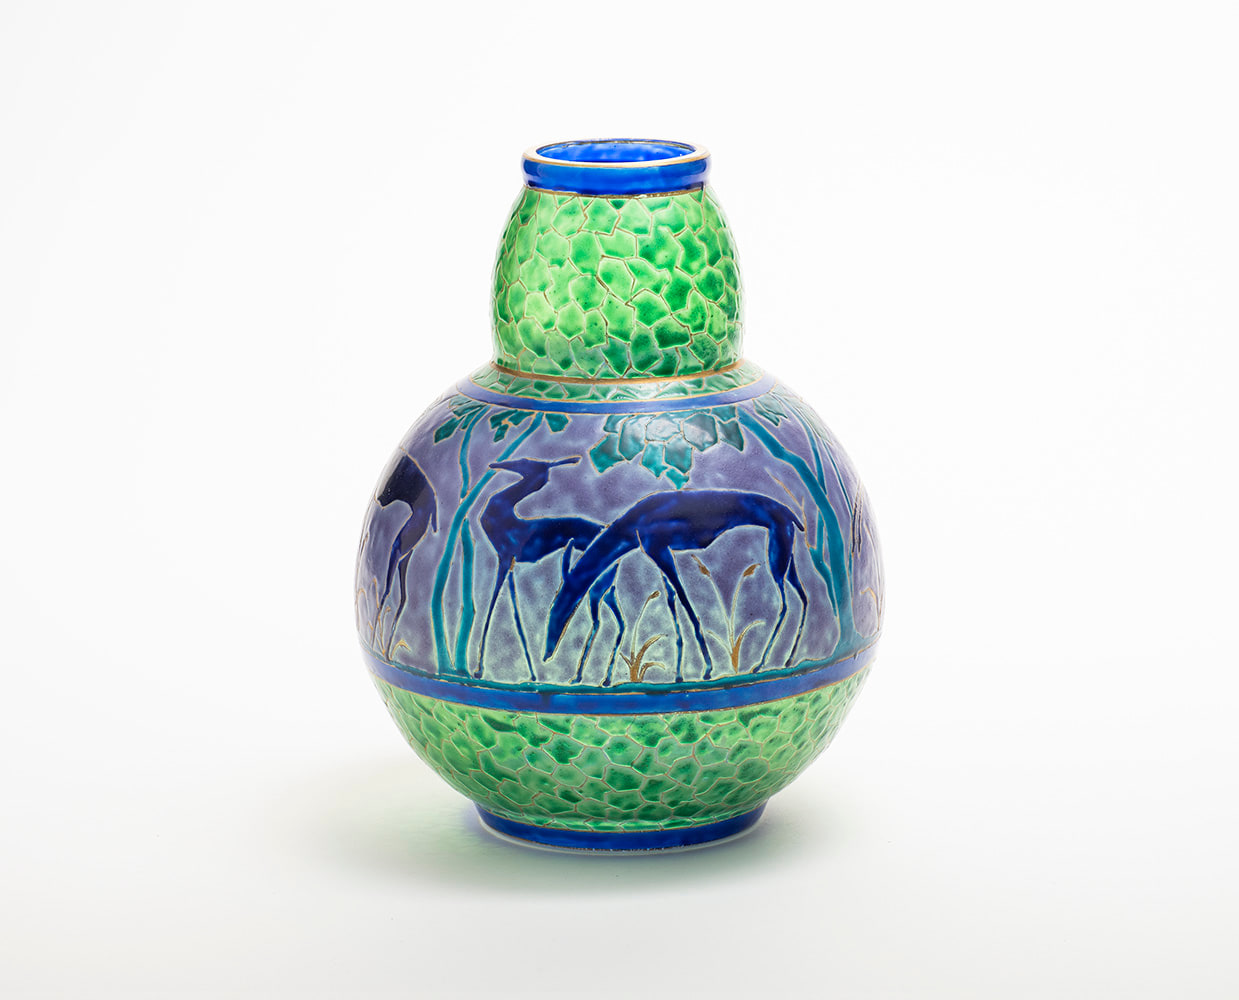 an enameled vase, the top and bottom sections in a green faceted gem-like pattern, with a horizontal frieze decoration at the middle in pale lavender with stylized art deco gazelles in deep blue with gold outlines